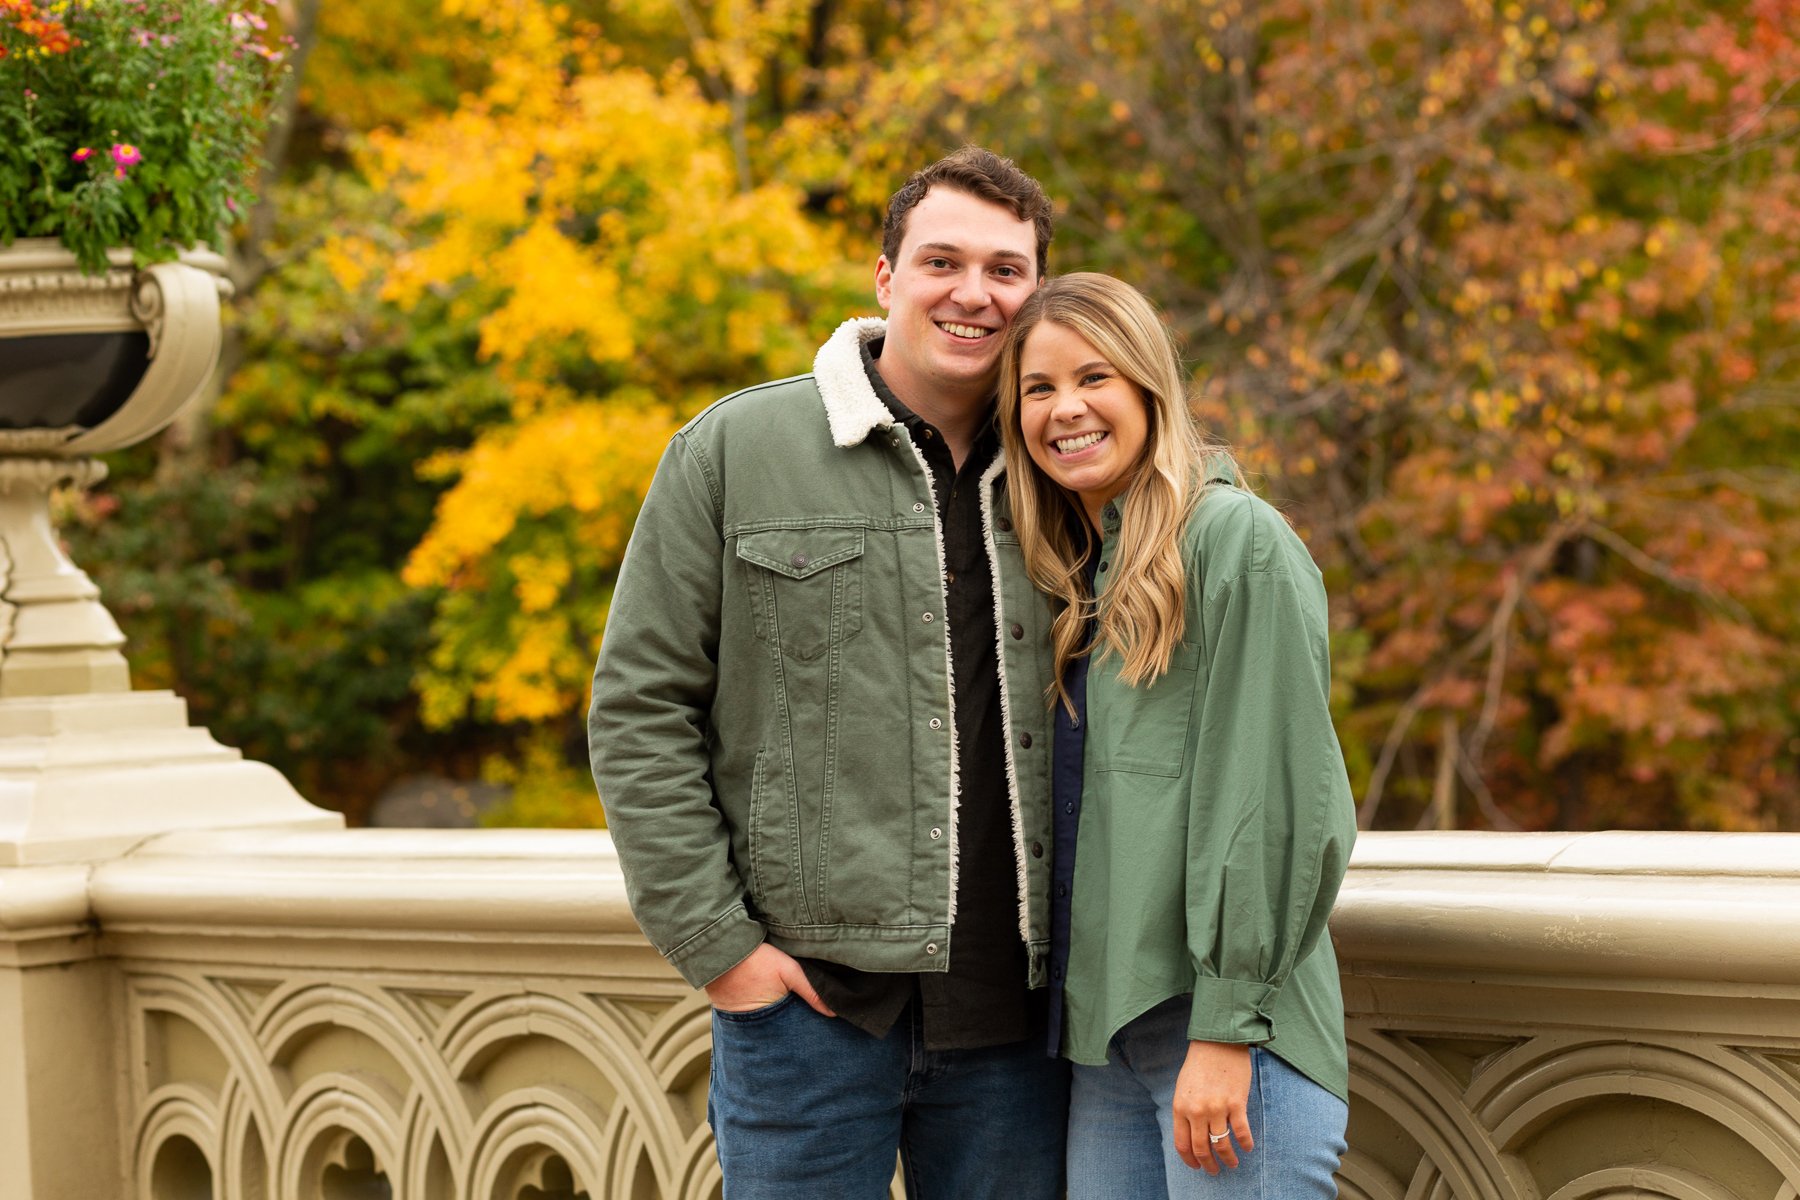 Central Park NYC Fall Foliage Proposal Photographer_0005.jpg